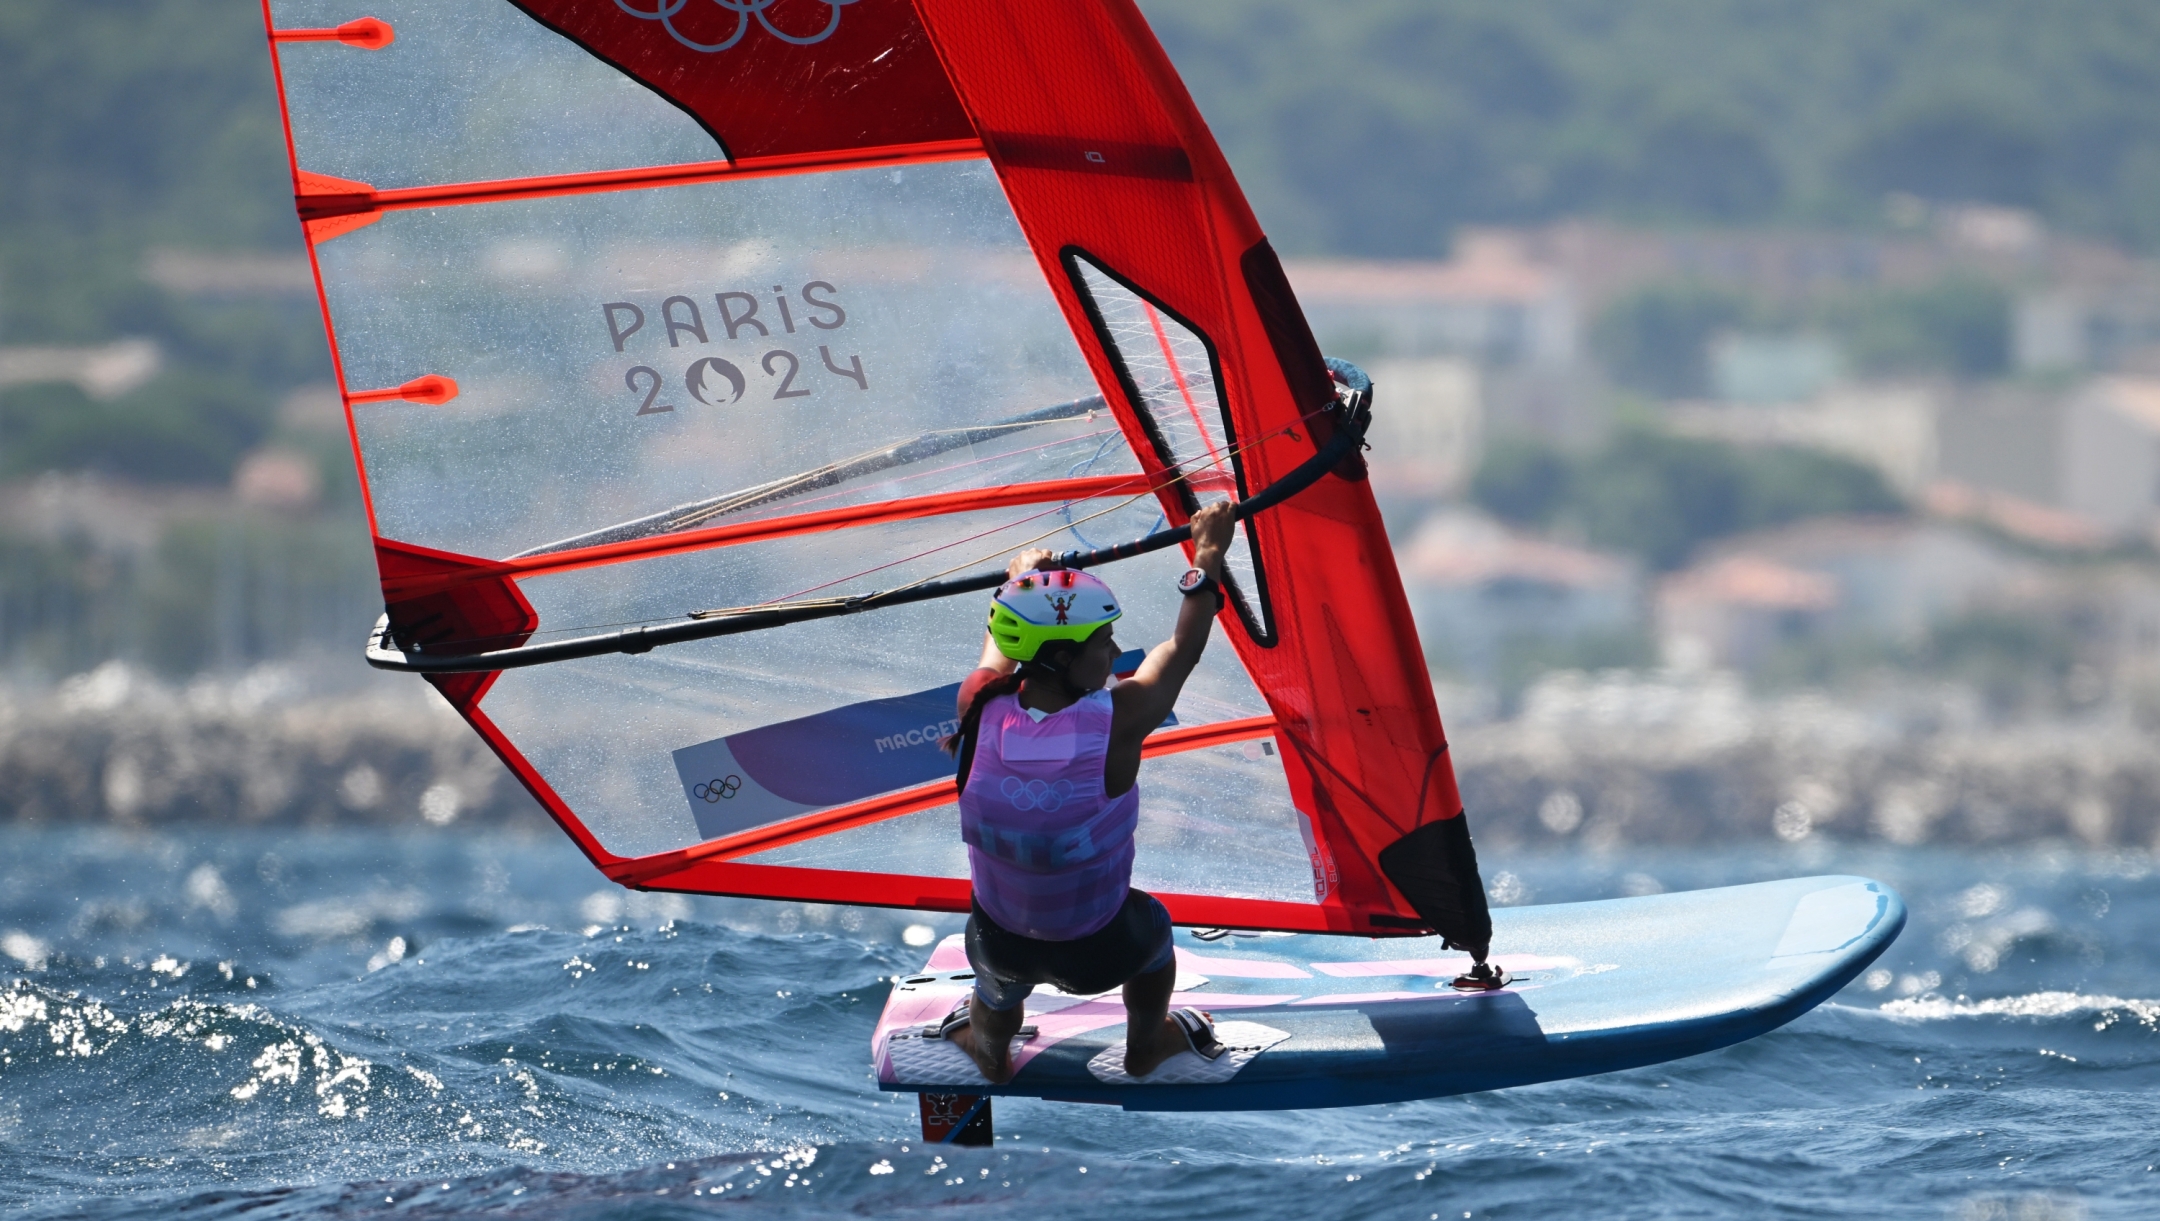 MARSEILLE, FRANCE - AUGUST 03: Marta Maggetti of Team Italy competes in the Women's Windsurf iQFoil class on day eight of the Olympic Games Paris 2024 at Marseille Marina on August 03, 2024 in Marseille, France. (Photo by Clive Mason/Getty Images)